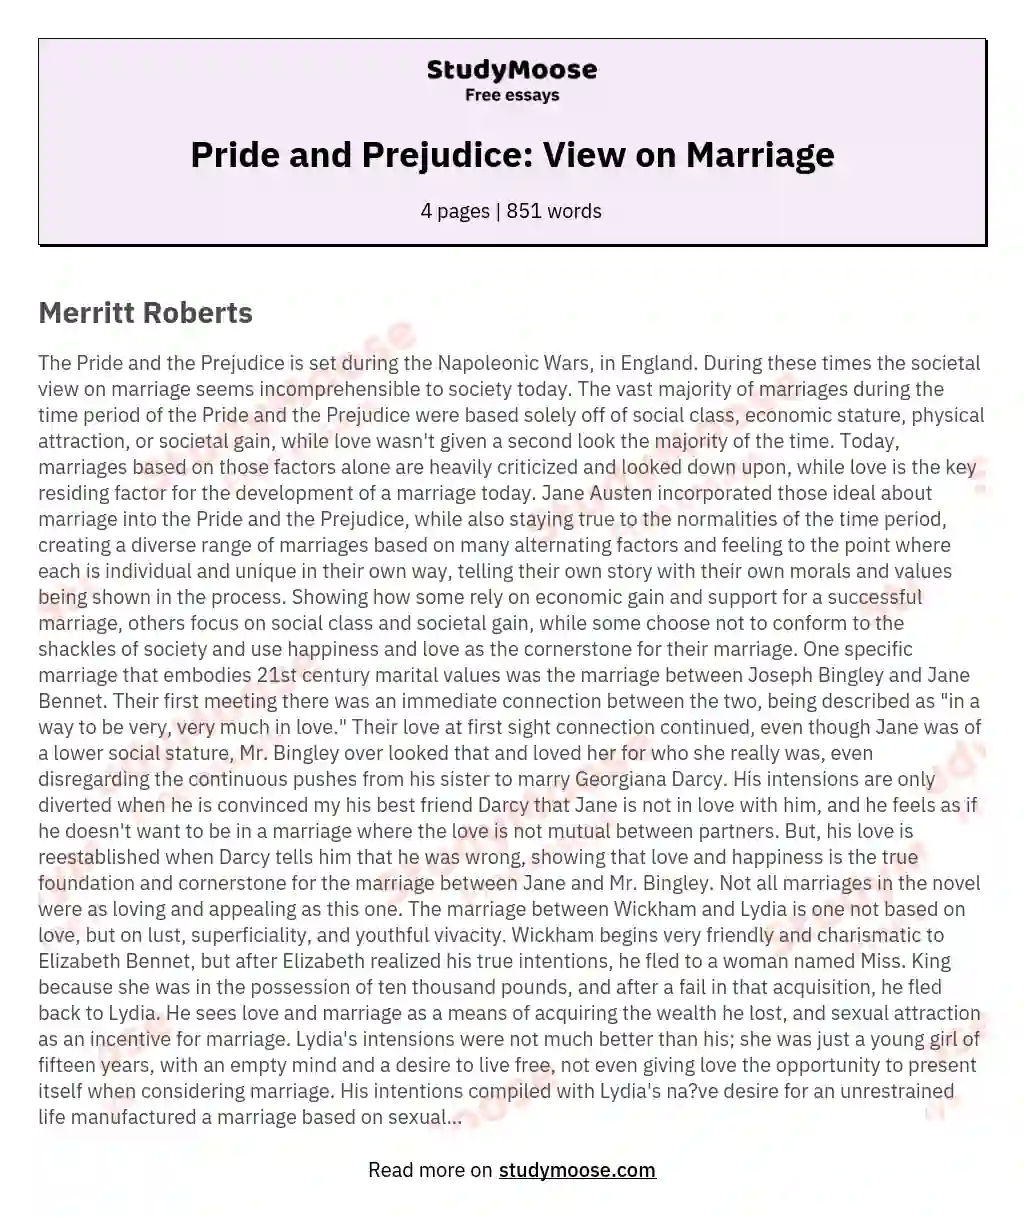 Pride and Prejudice: View on Marriage essay